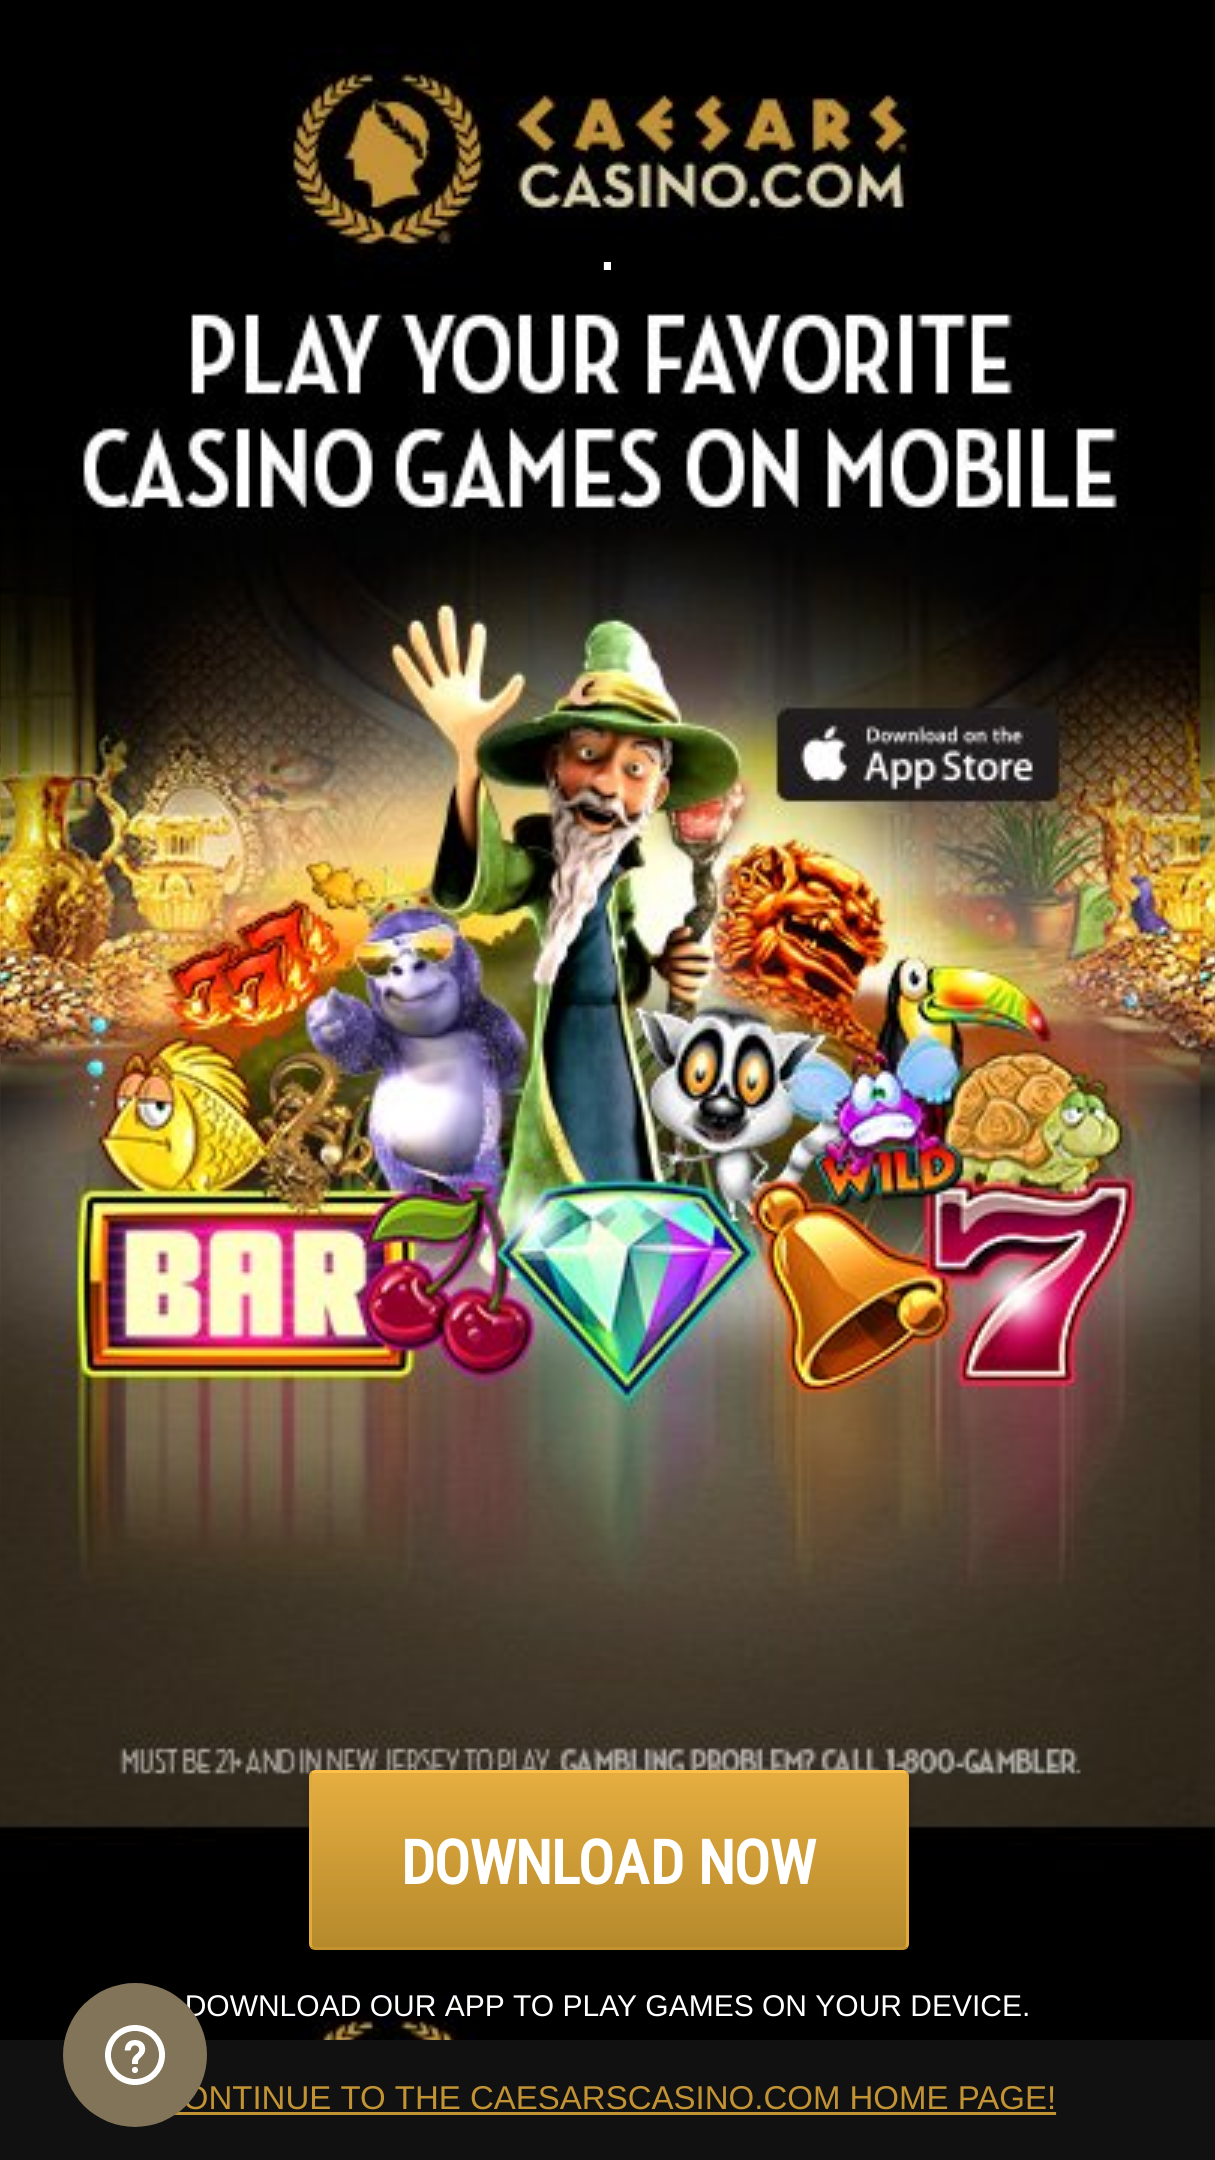 parx online slots and casino